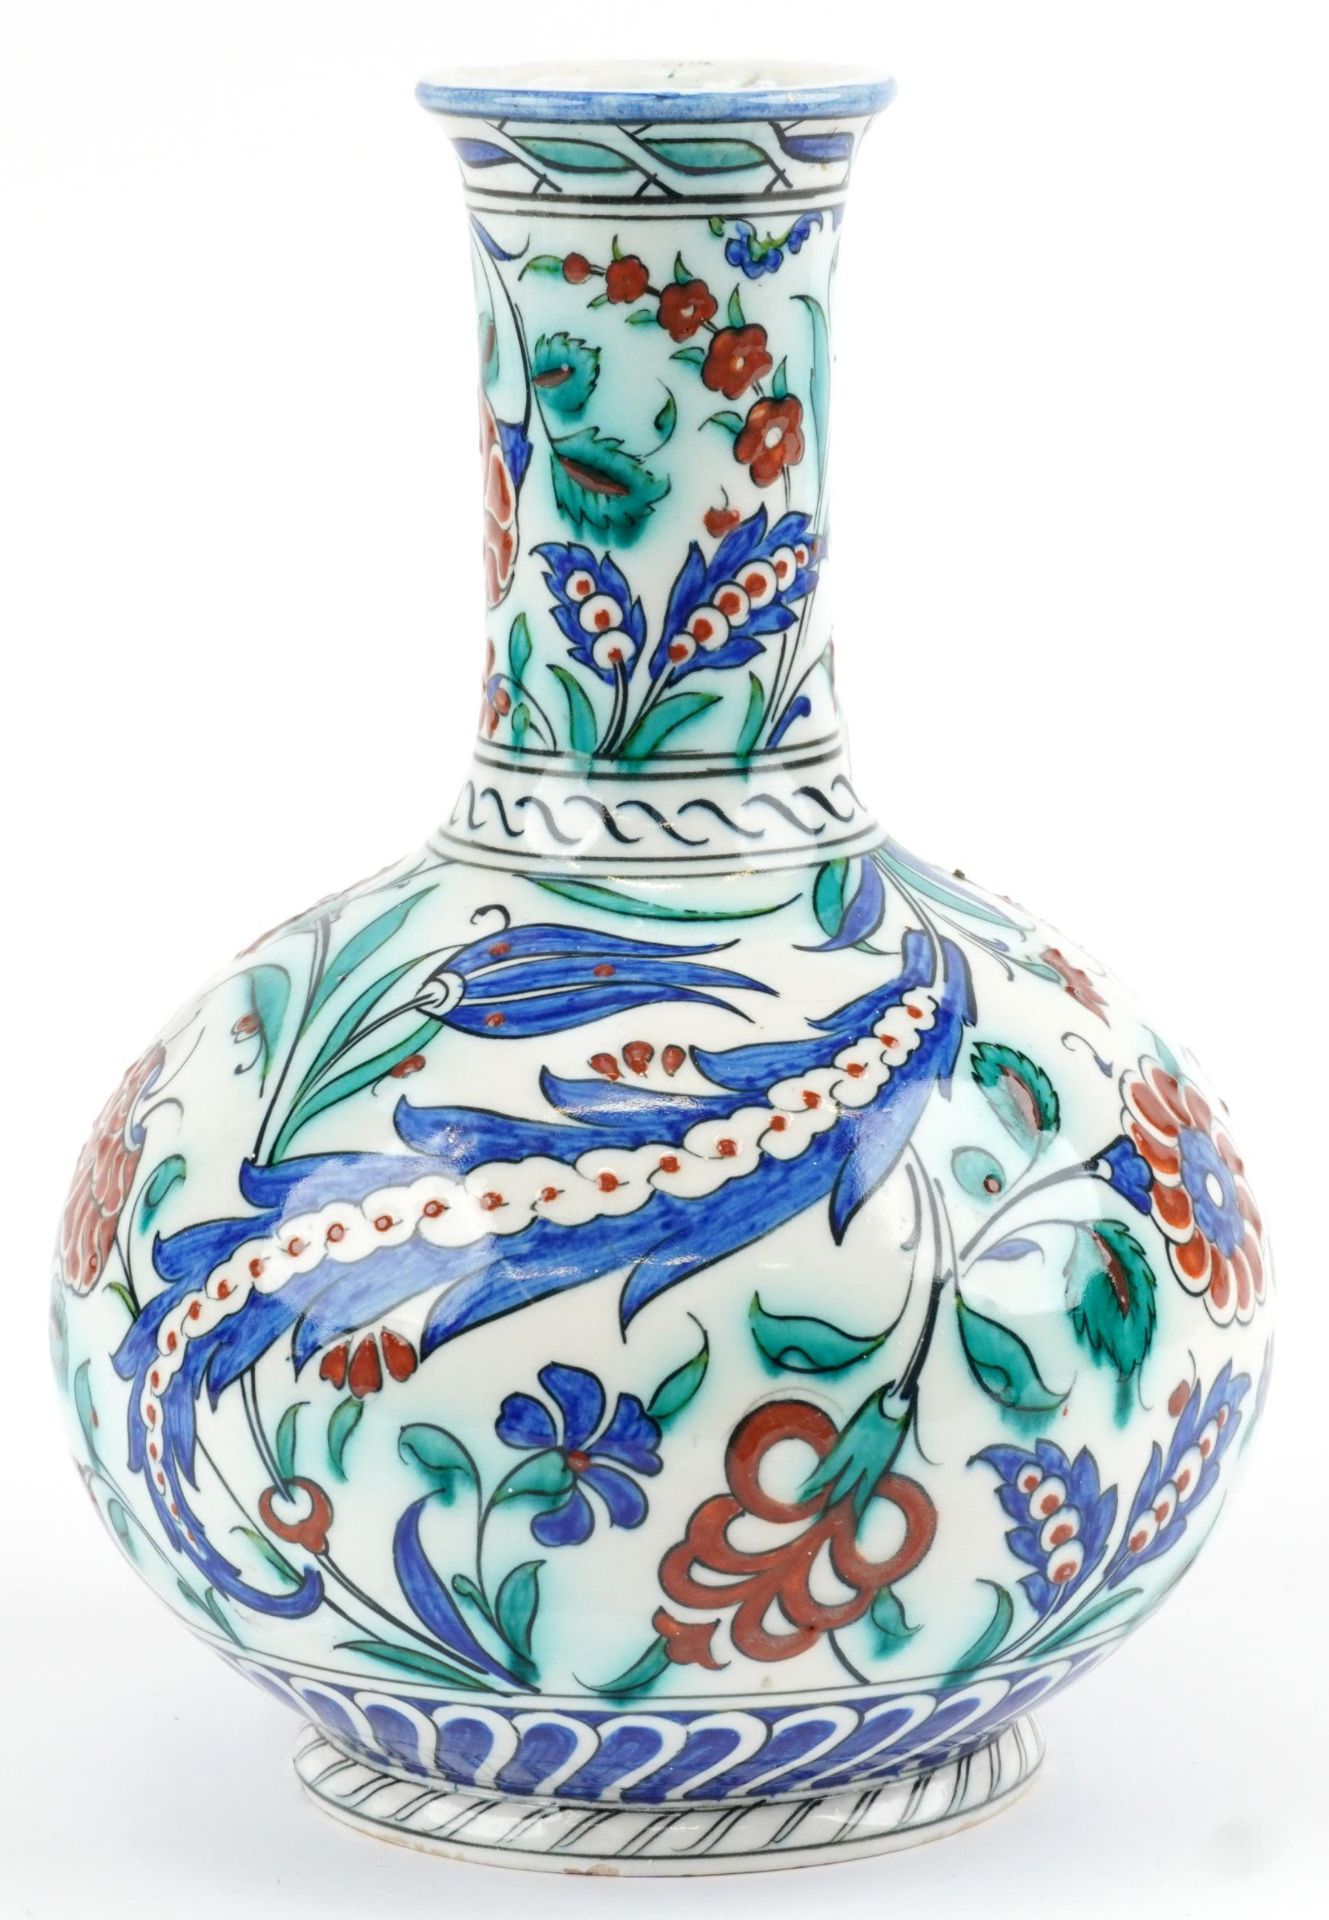 Turkish Iznik pottery kendi hand painted with stylised flowers, 27.5cm high : For further - Image 4 of 7